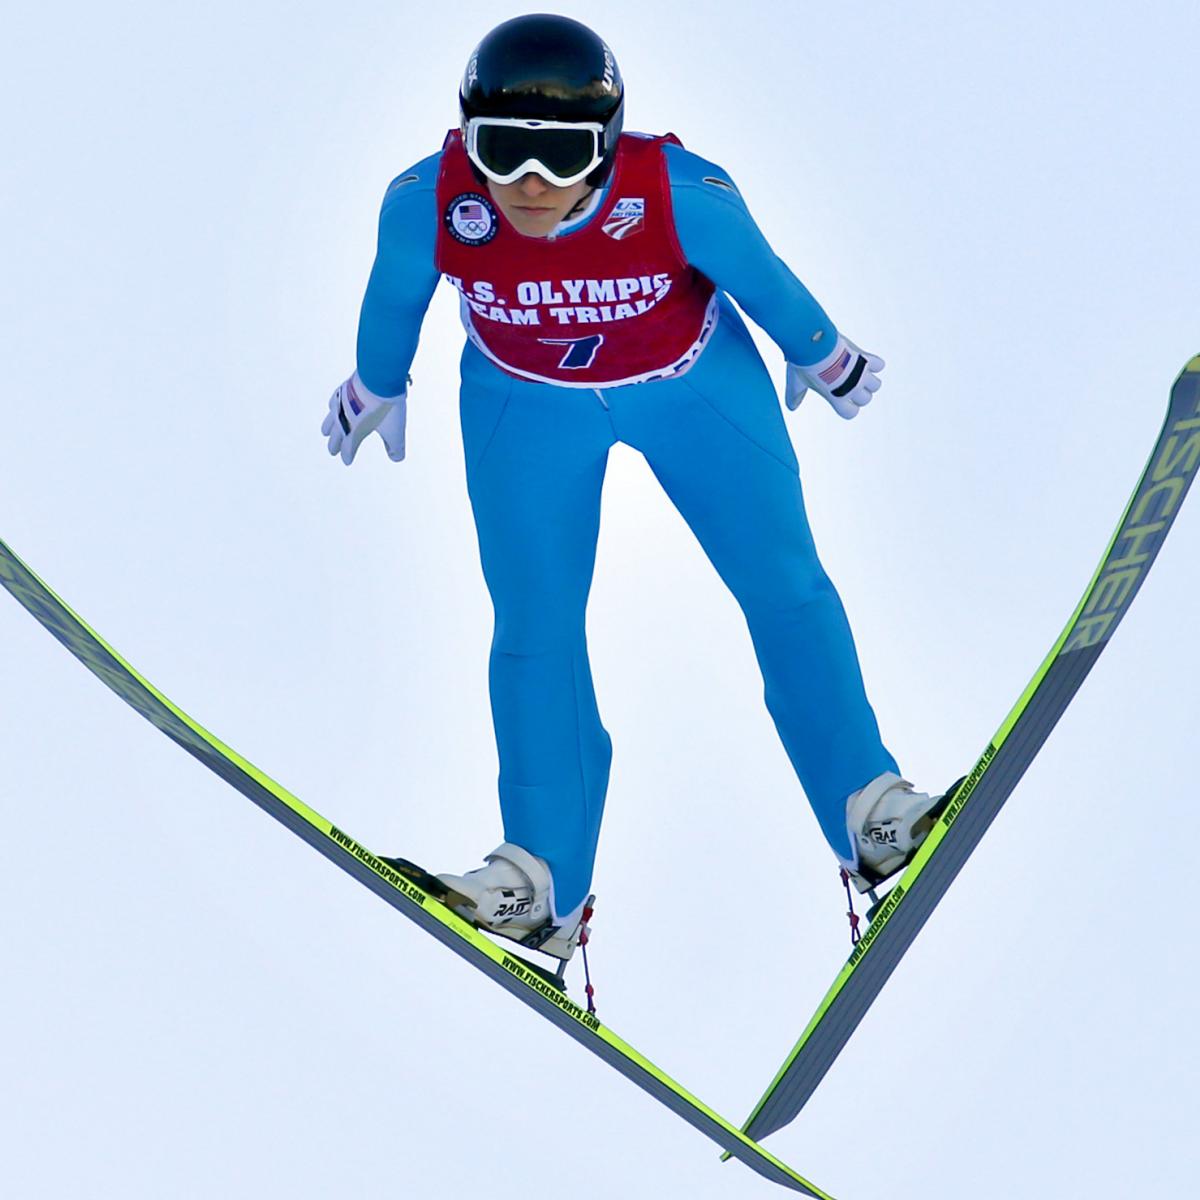 Women's Normal Hill Ski Jumping Olympics 2014: Potential Stars in Debut Event ...